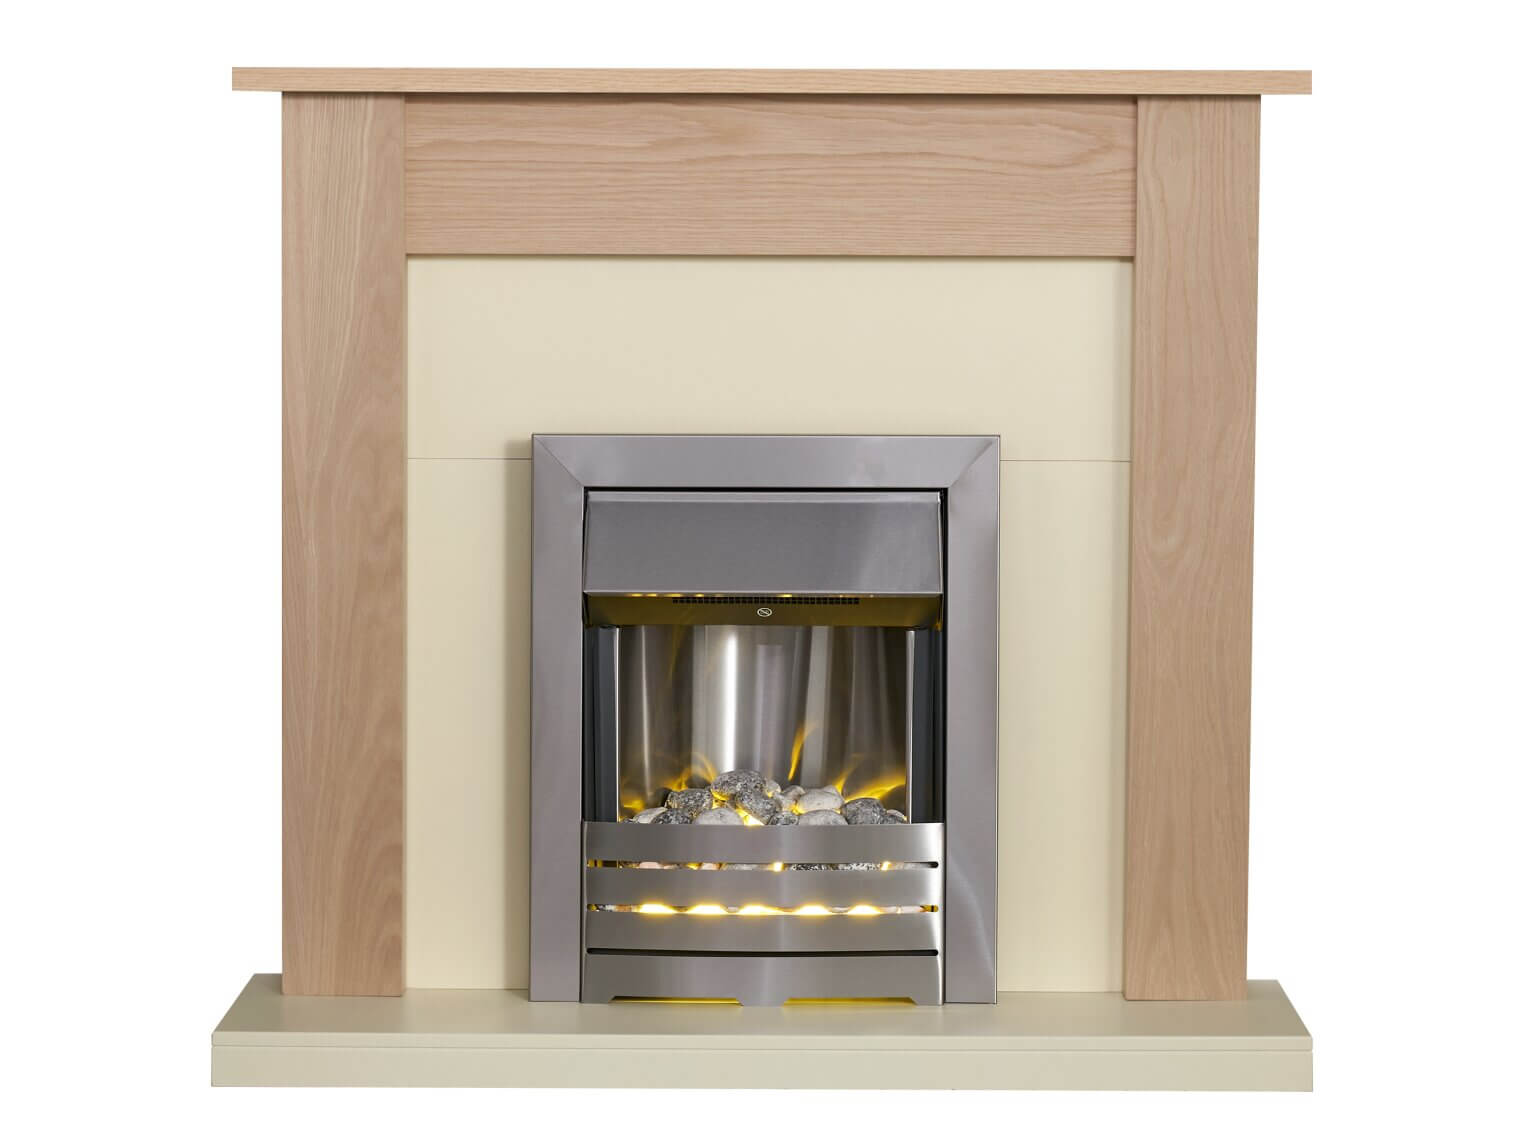 Adam Southwold Fireplace in Oak & Cream with Helios Electric Fire in Brushed Steel - Glowing Flames